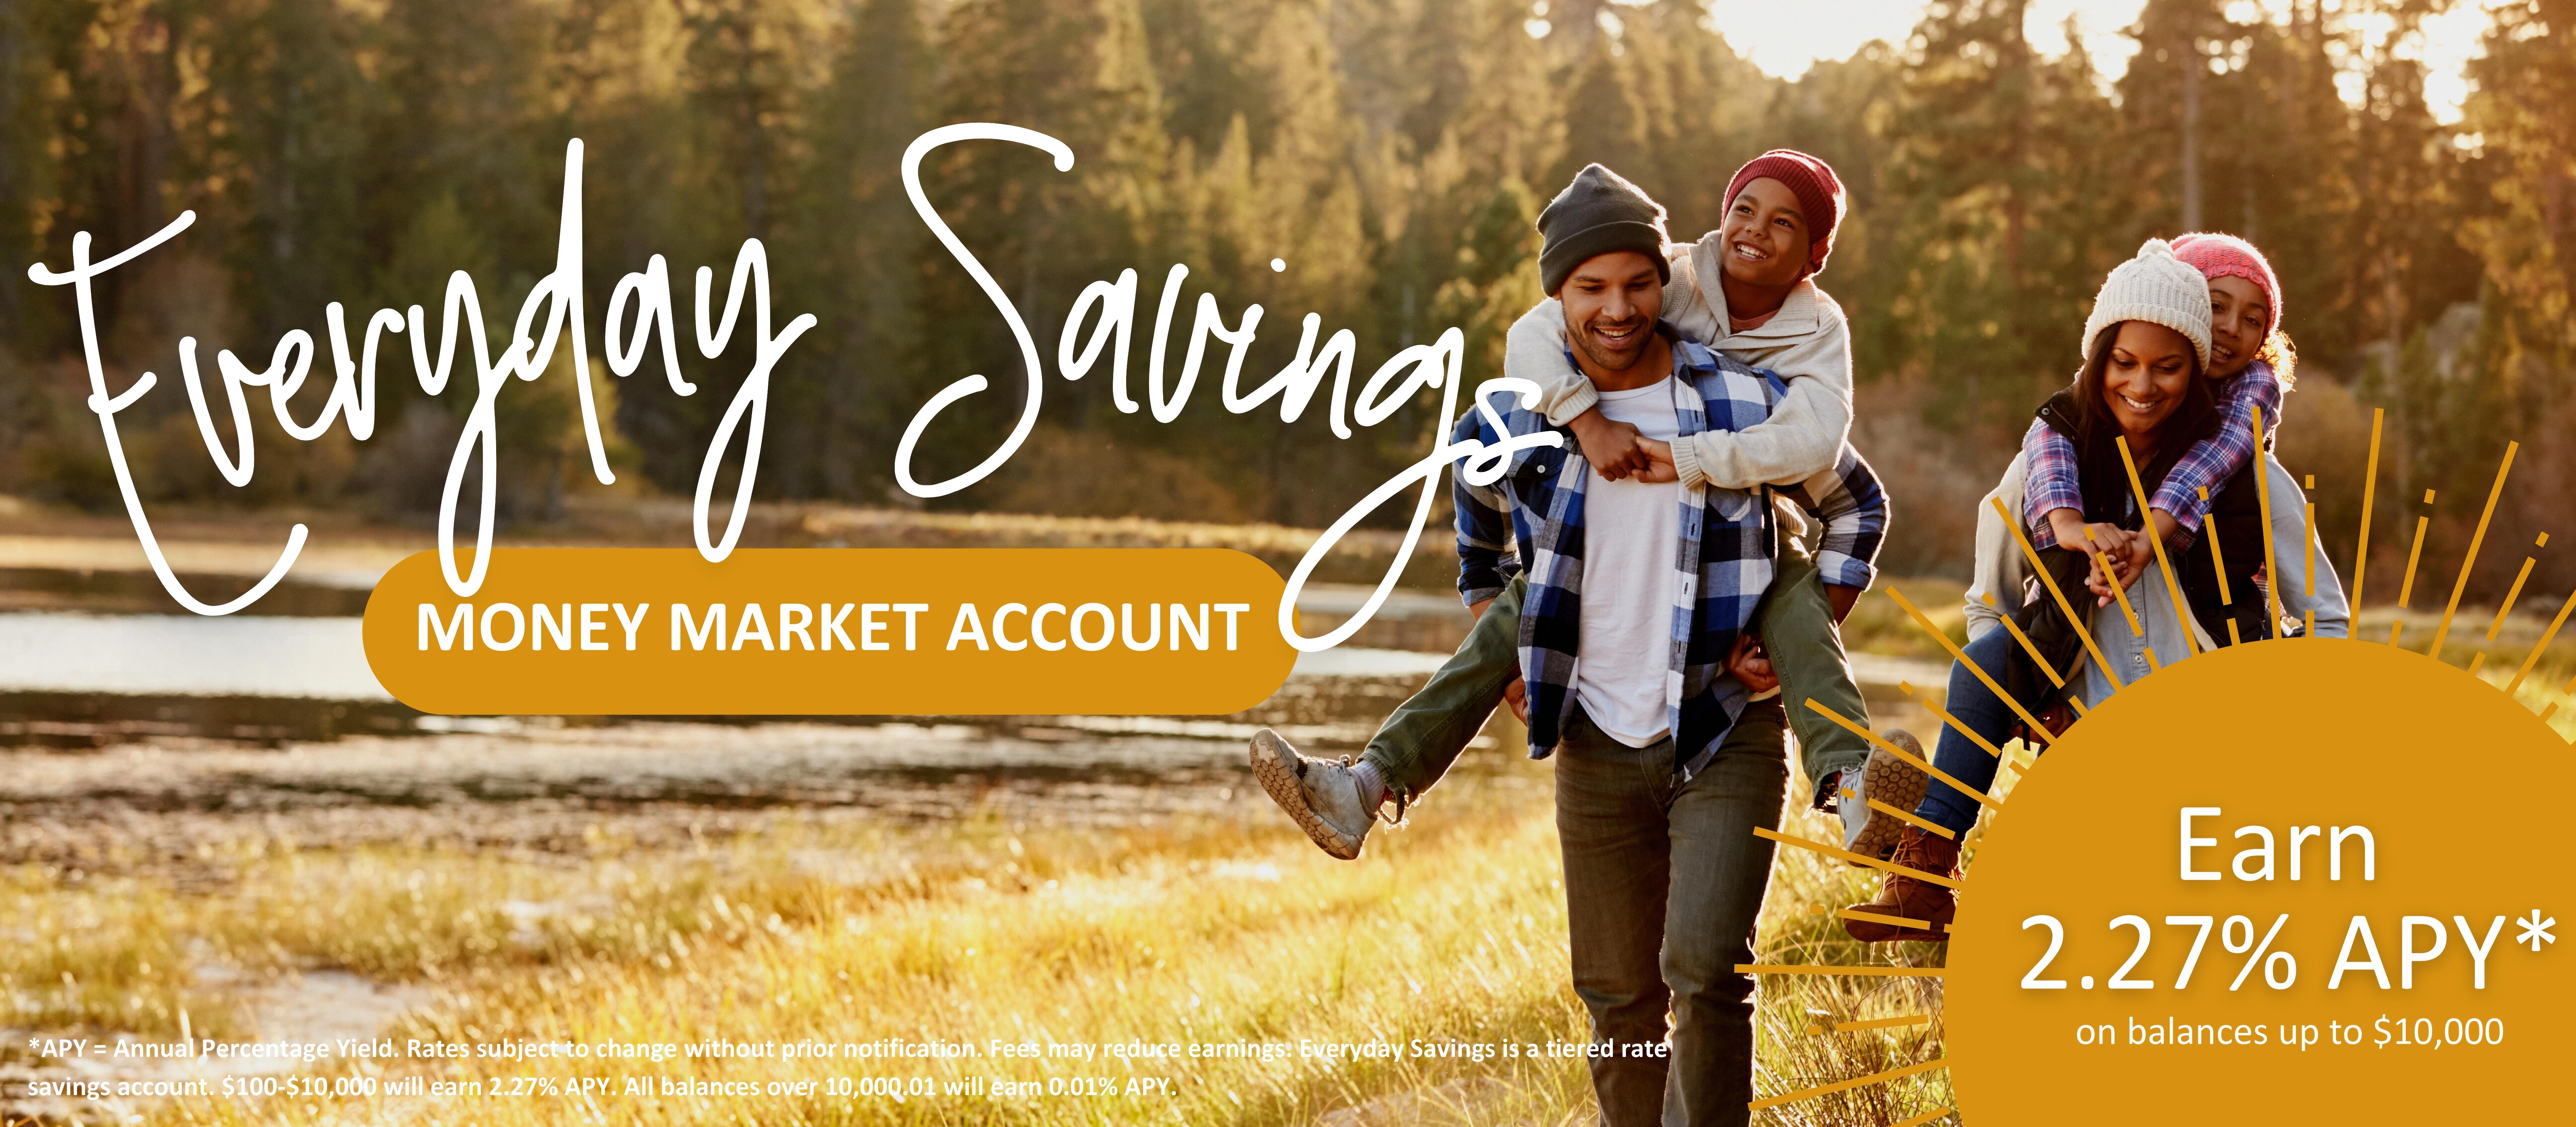 Everyday Savings Money Market. Earn 2.27% APY on up to $10,000.